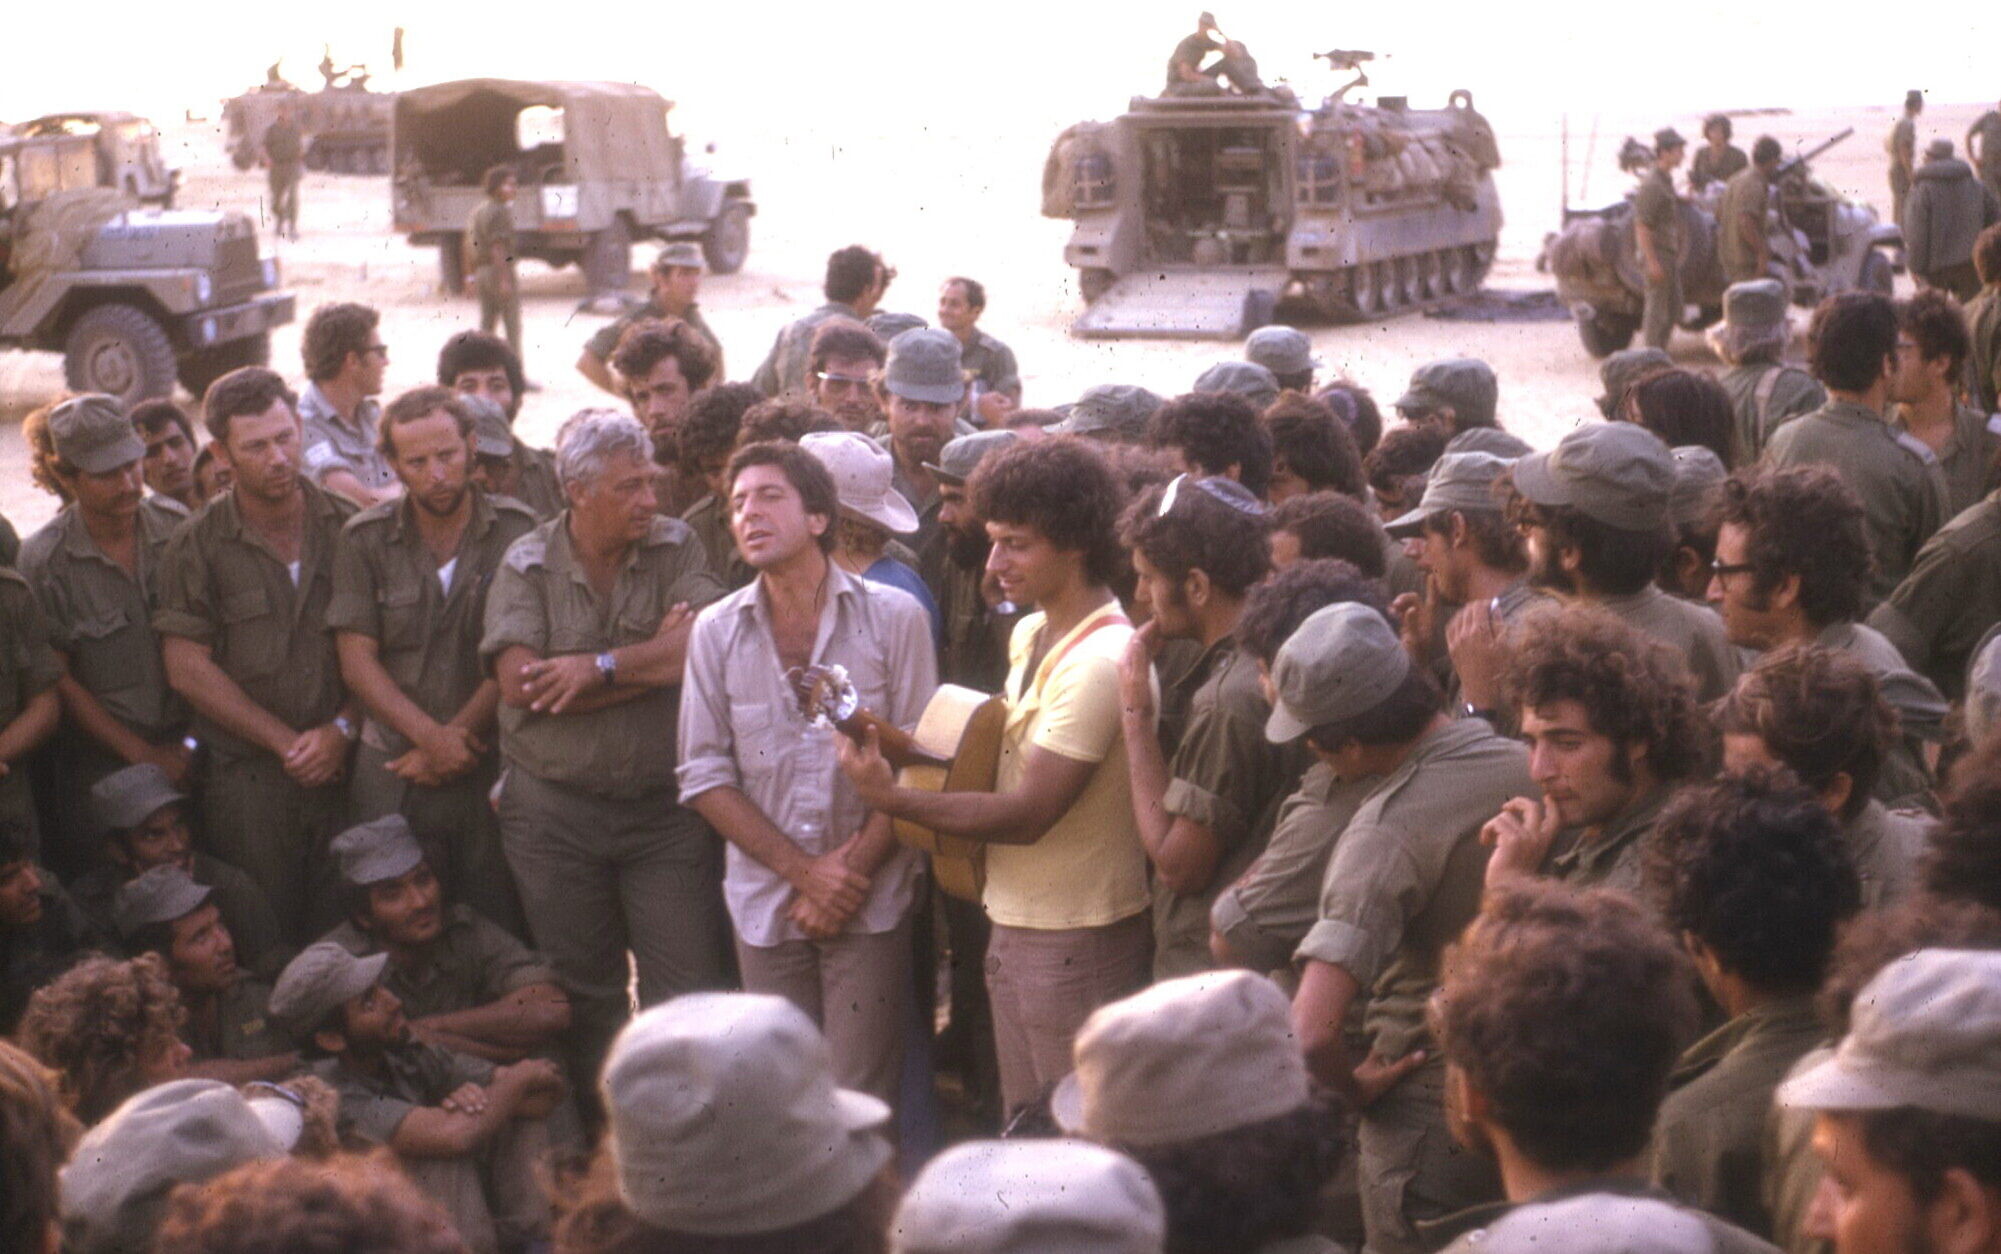 Leonard Cohen, center, performs with Israeli singer Matti Caspi, on guitar, for Israeli troops in the Sinai in 1973. Ariel Sharon is to the left of Cohen, with arms crossed (Yaakovi Doron)